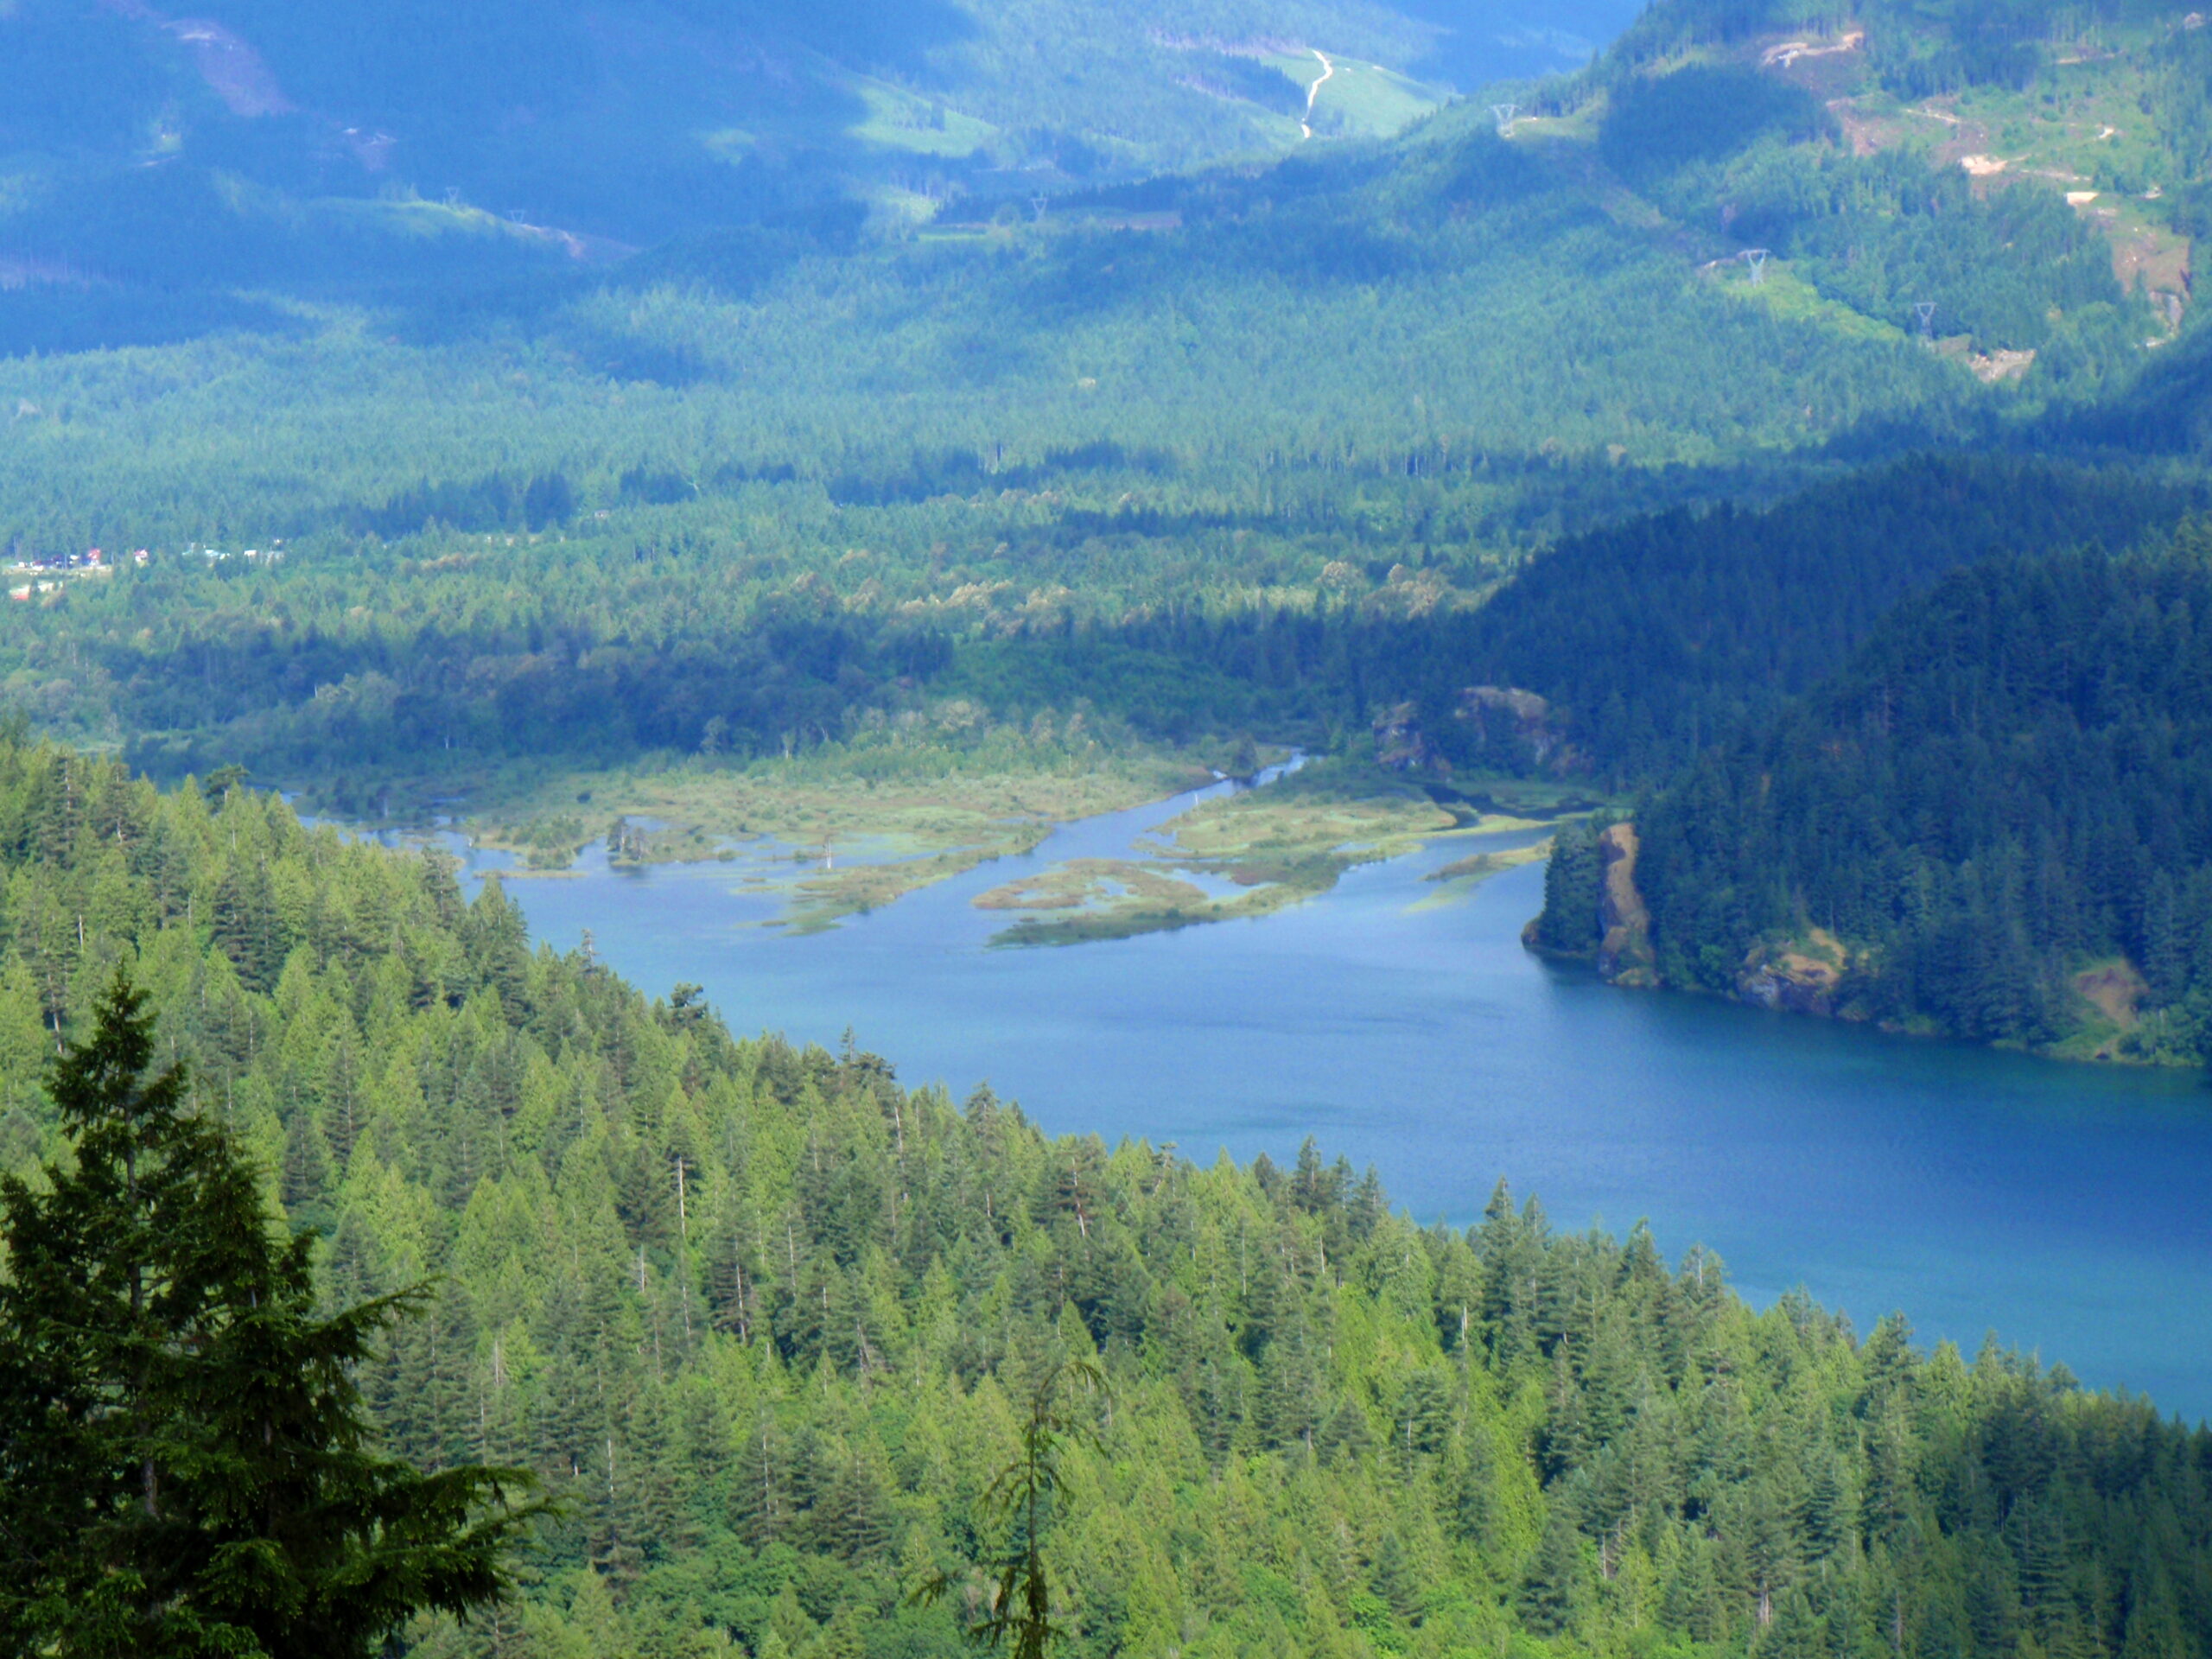 This is a photo of Sts’ailes Territory along the Chehalis River in BC.